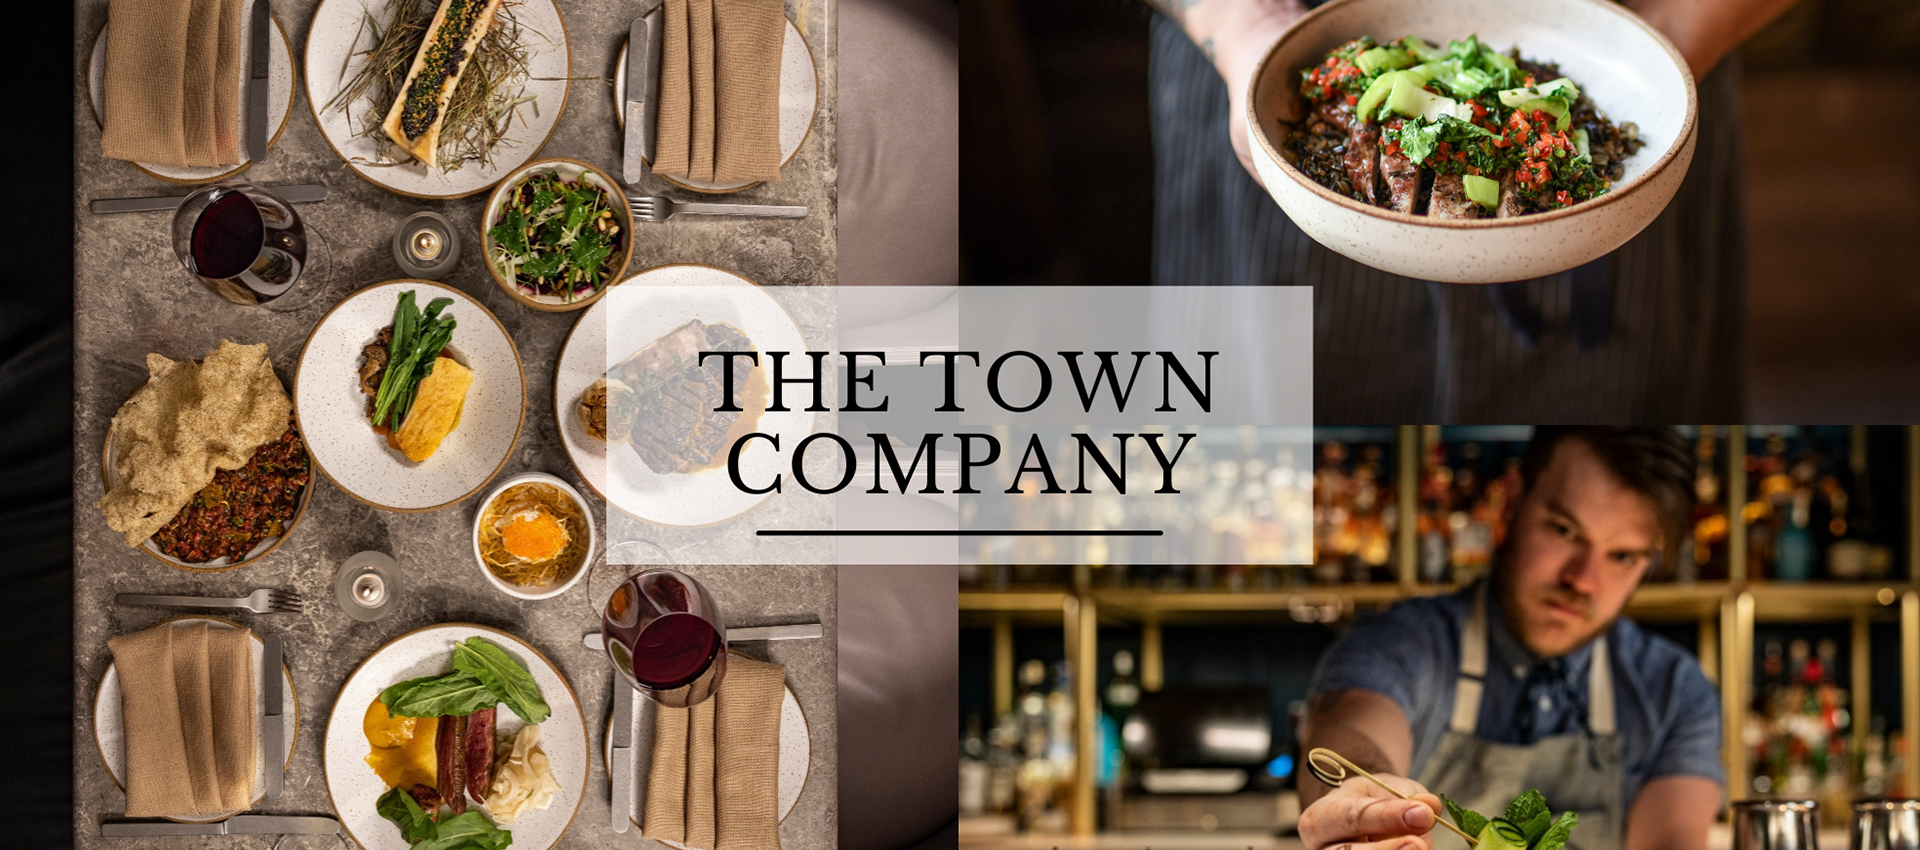 The Town Company Culinary Options.